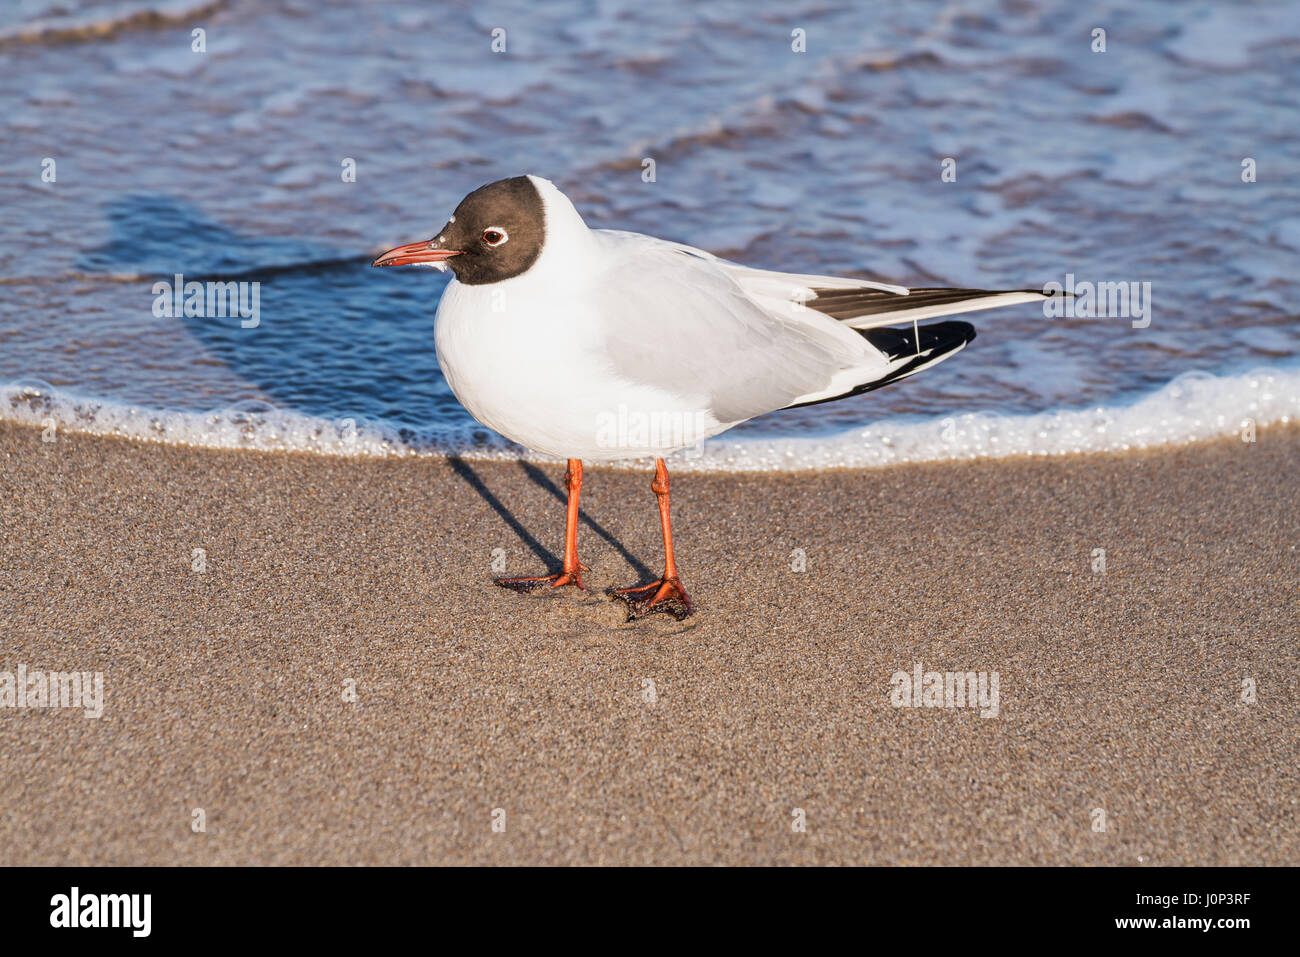 Detail view of a Black-headed gull on the beach of the Baltic Sea in Kolobrzeg, West Pomeranian, Poland, Europe Stock Photo